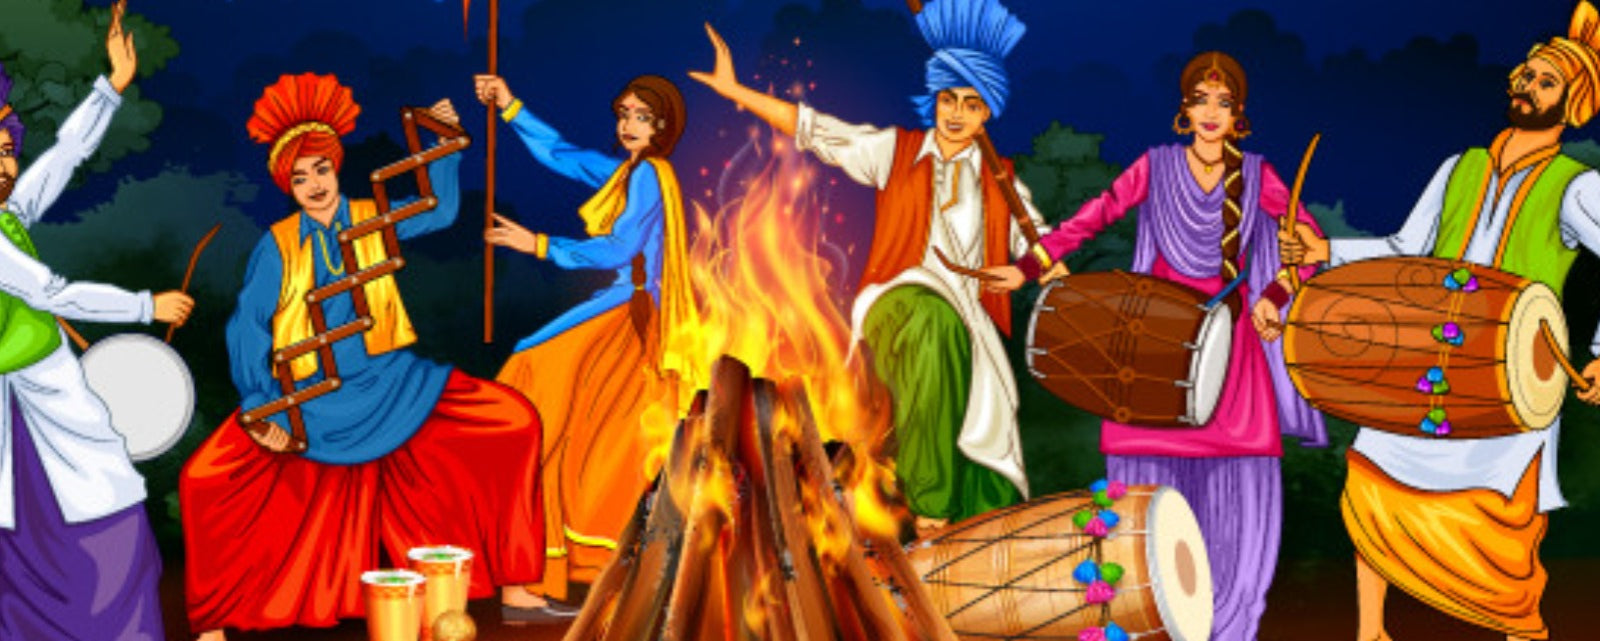 5 Easy, Healthy and Delicious Lohri Recipes from Dry Fruits